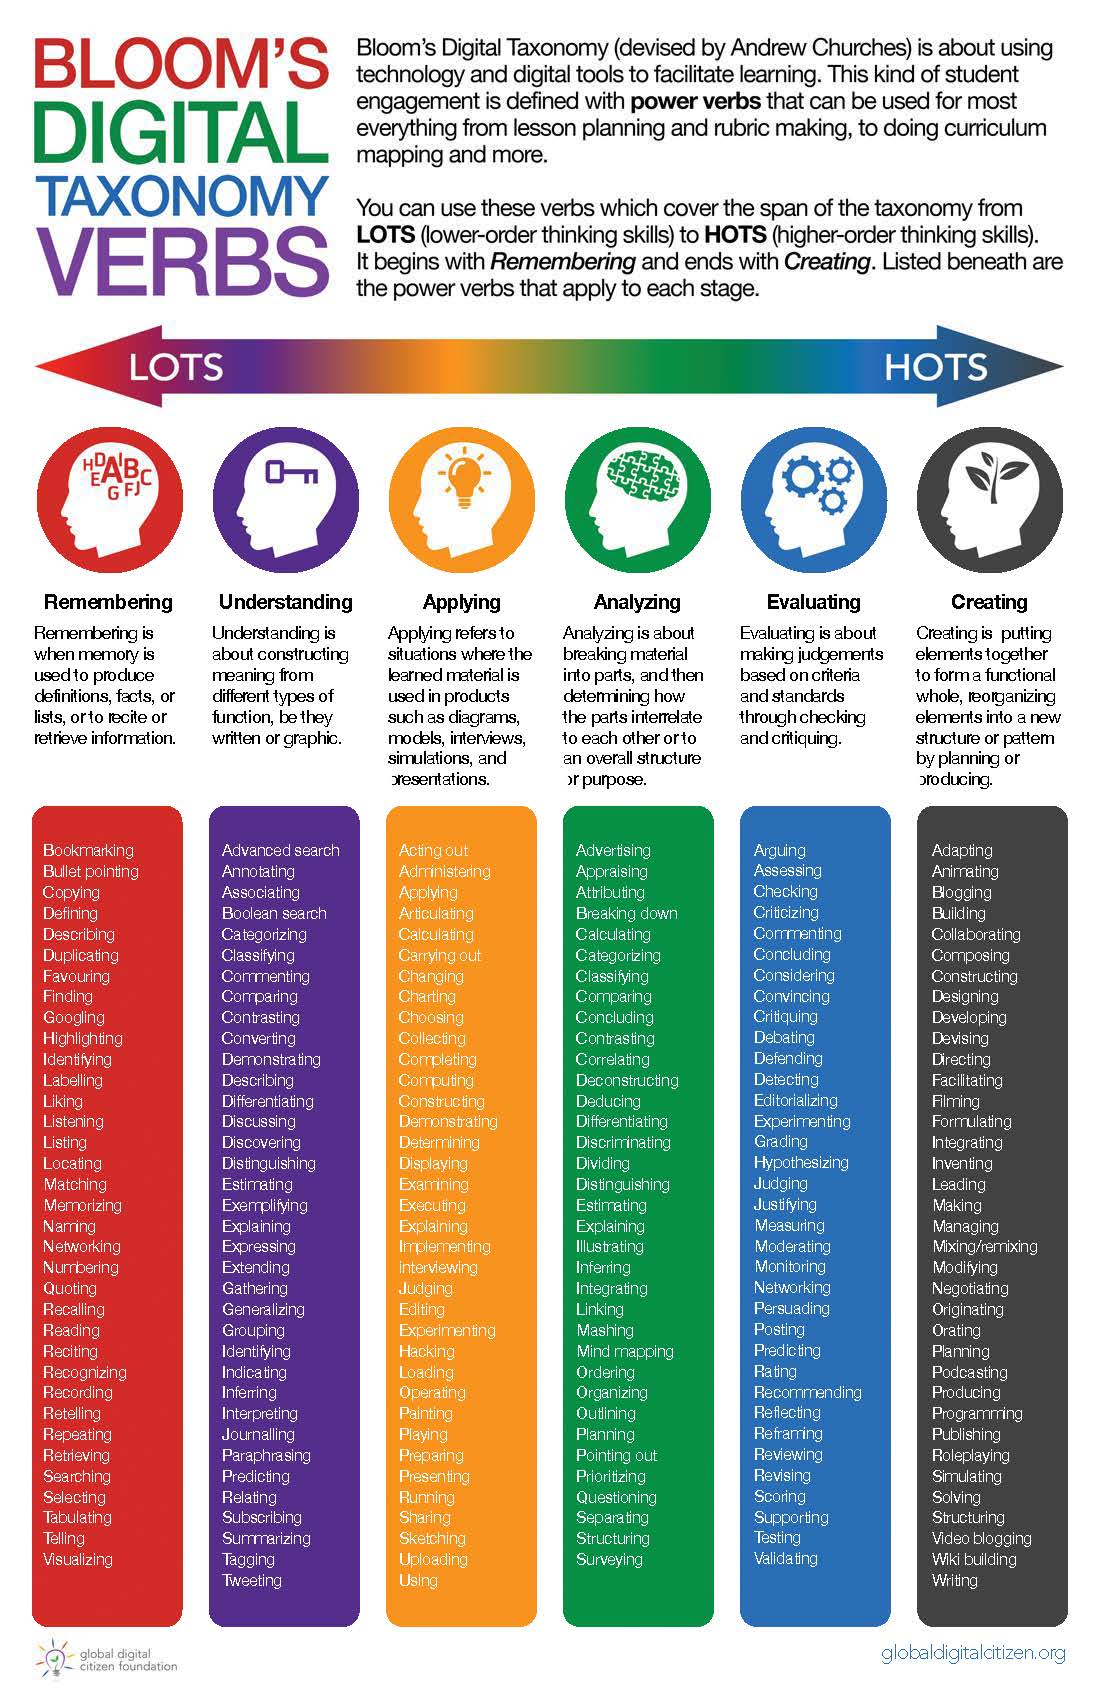 Bloom’s Digital Taxonomy associates verbs with the Bloom’s Taxonomy stages, emphasizing actions that are appropriate in an eLearning environment.